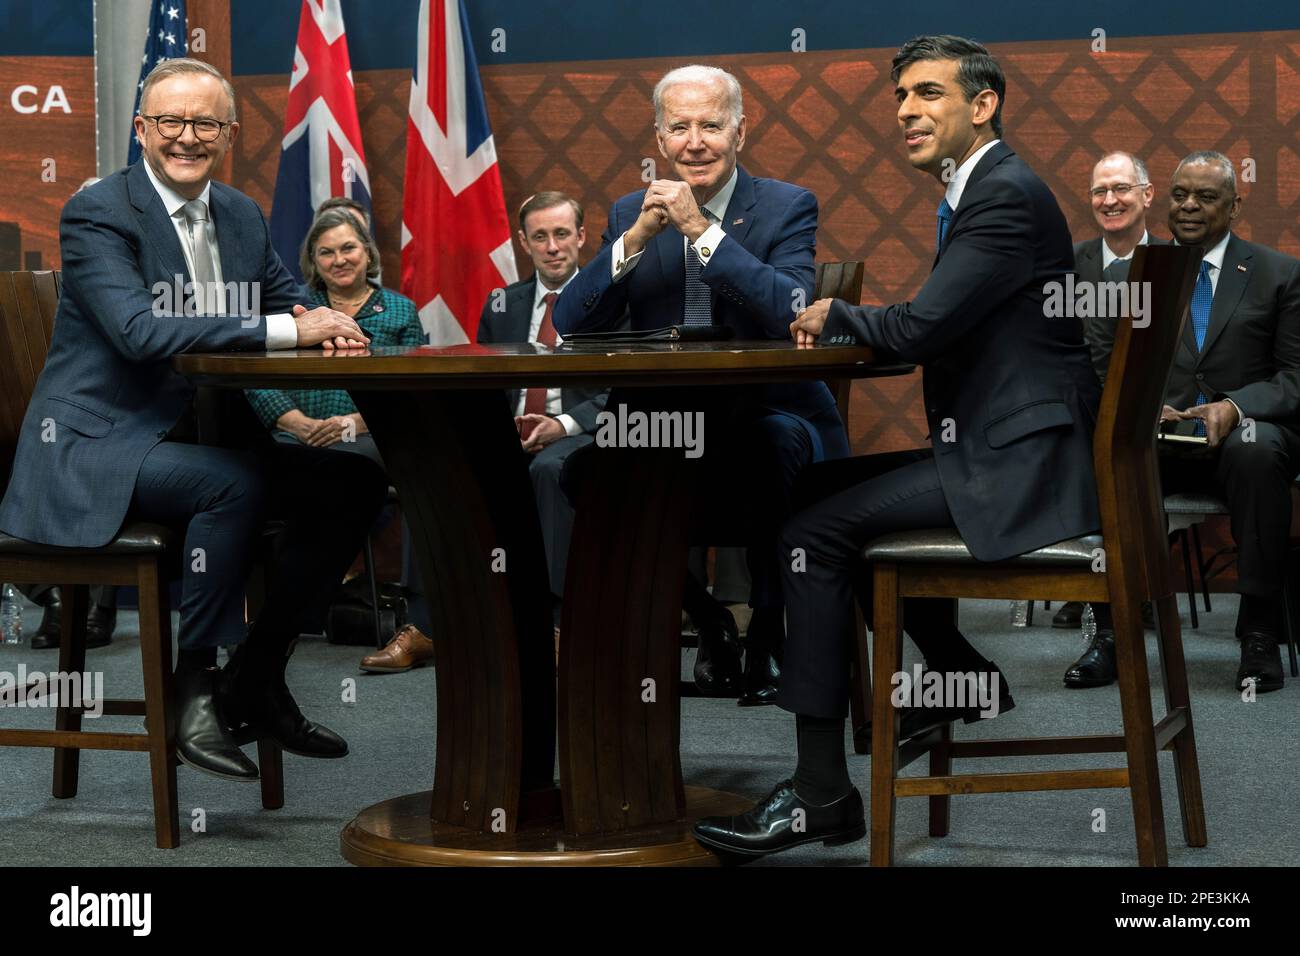 San Diego, United States of America. 13 March, 2023. U.S President Joe Biden, center, during a trilateral meeting with Australian Prime Minister Anthony Albanese, left, and British Prime Minister Rishi Sunak during a meeting with at Point Loma naval base March 13, 2023 in San Diego, California. The three leaders of the AUKUS security pact agreed on expanding their nuclear-powered submarine fleet.  Credit: Chad McNeeley/DoD Photo/Alamy Live News Stock Photo